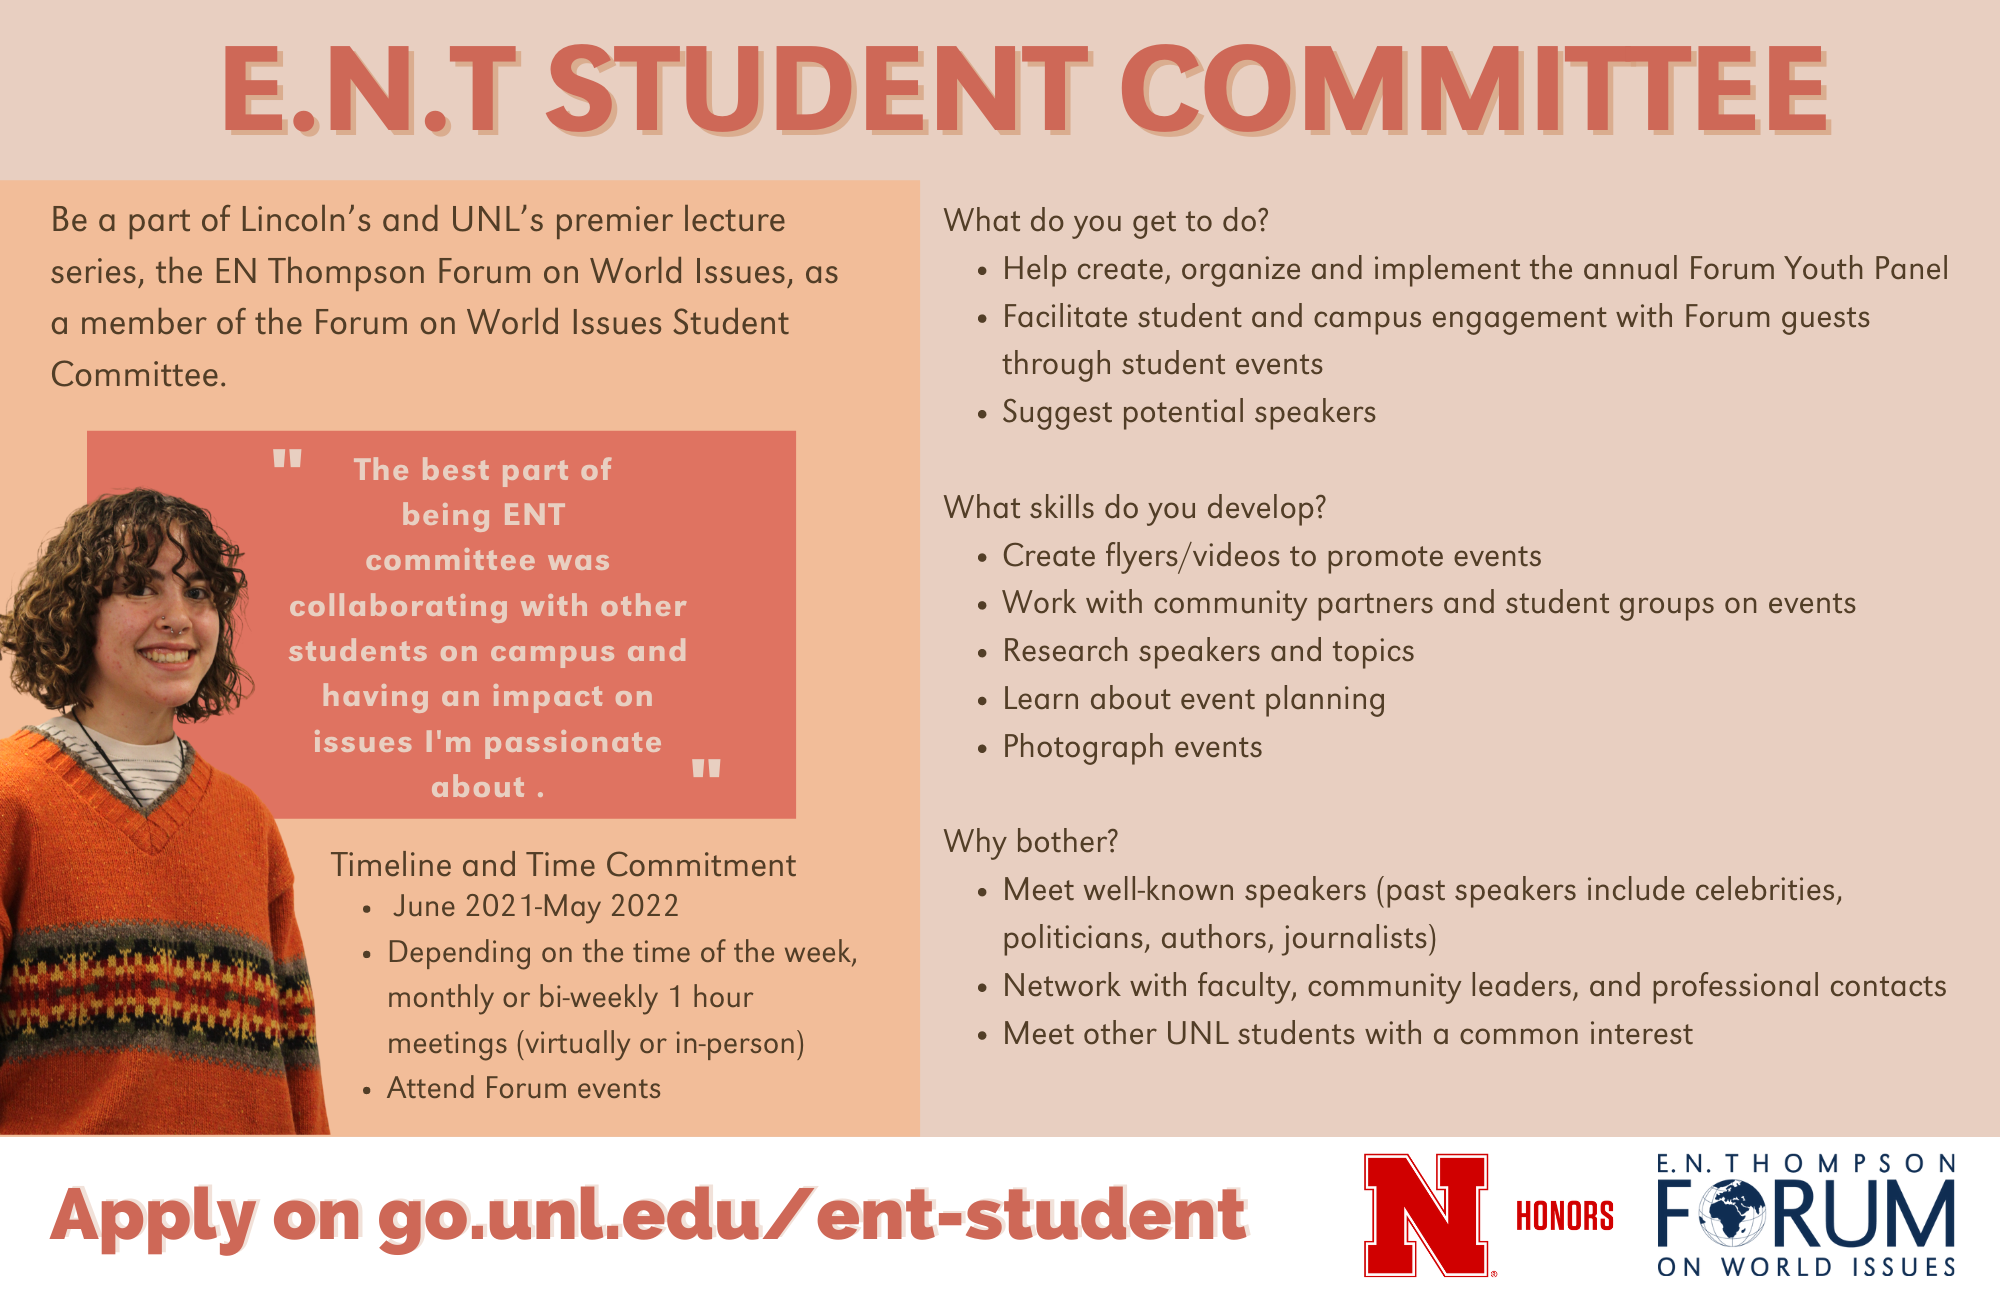 Apply to join the EN Thompson Student Committee